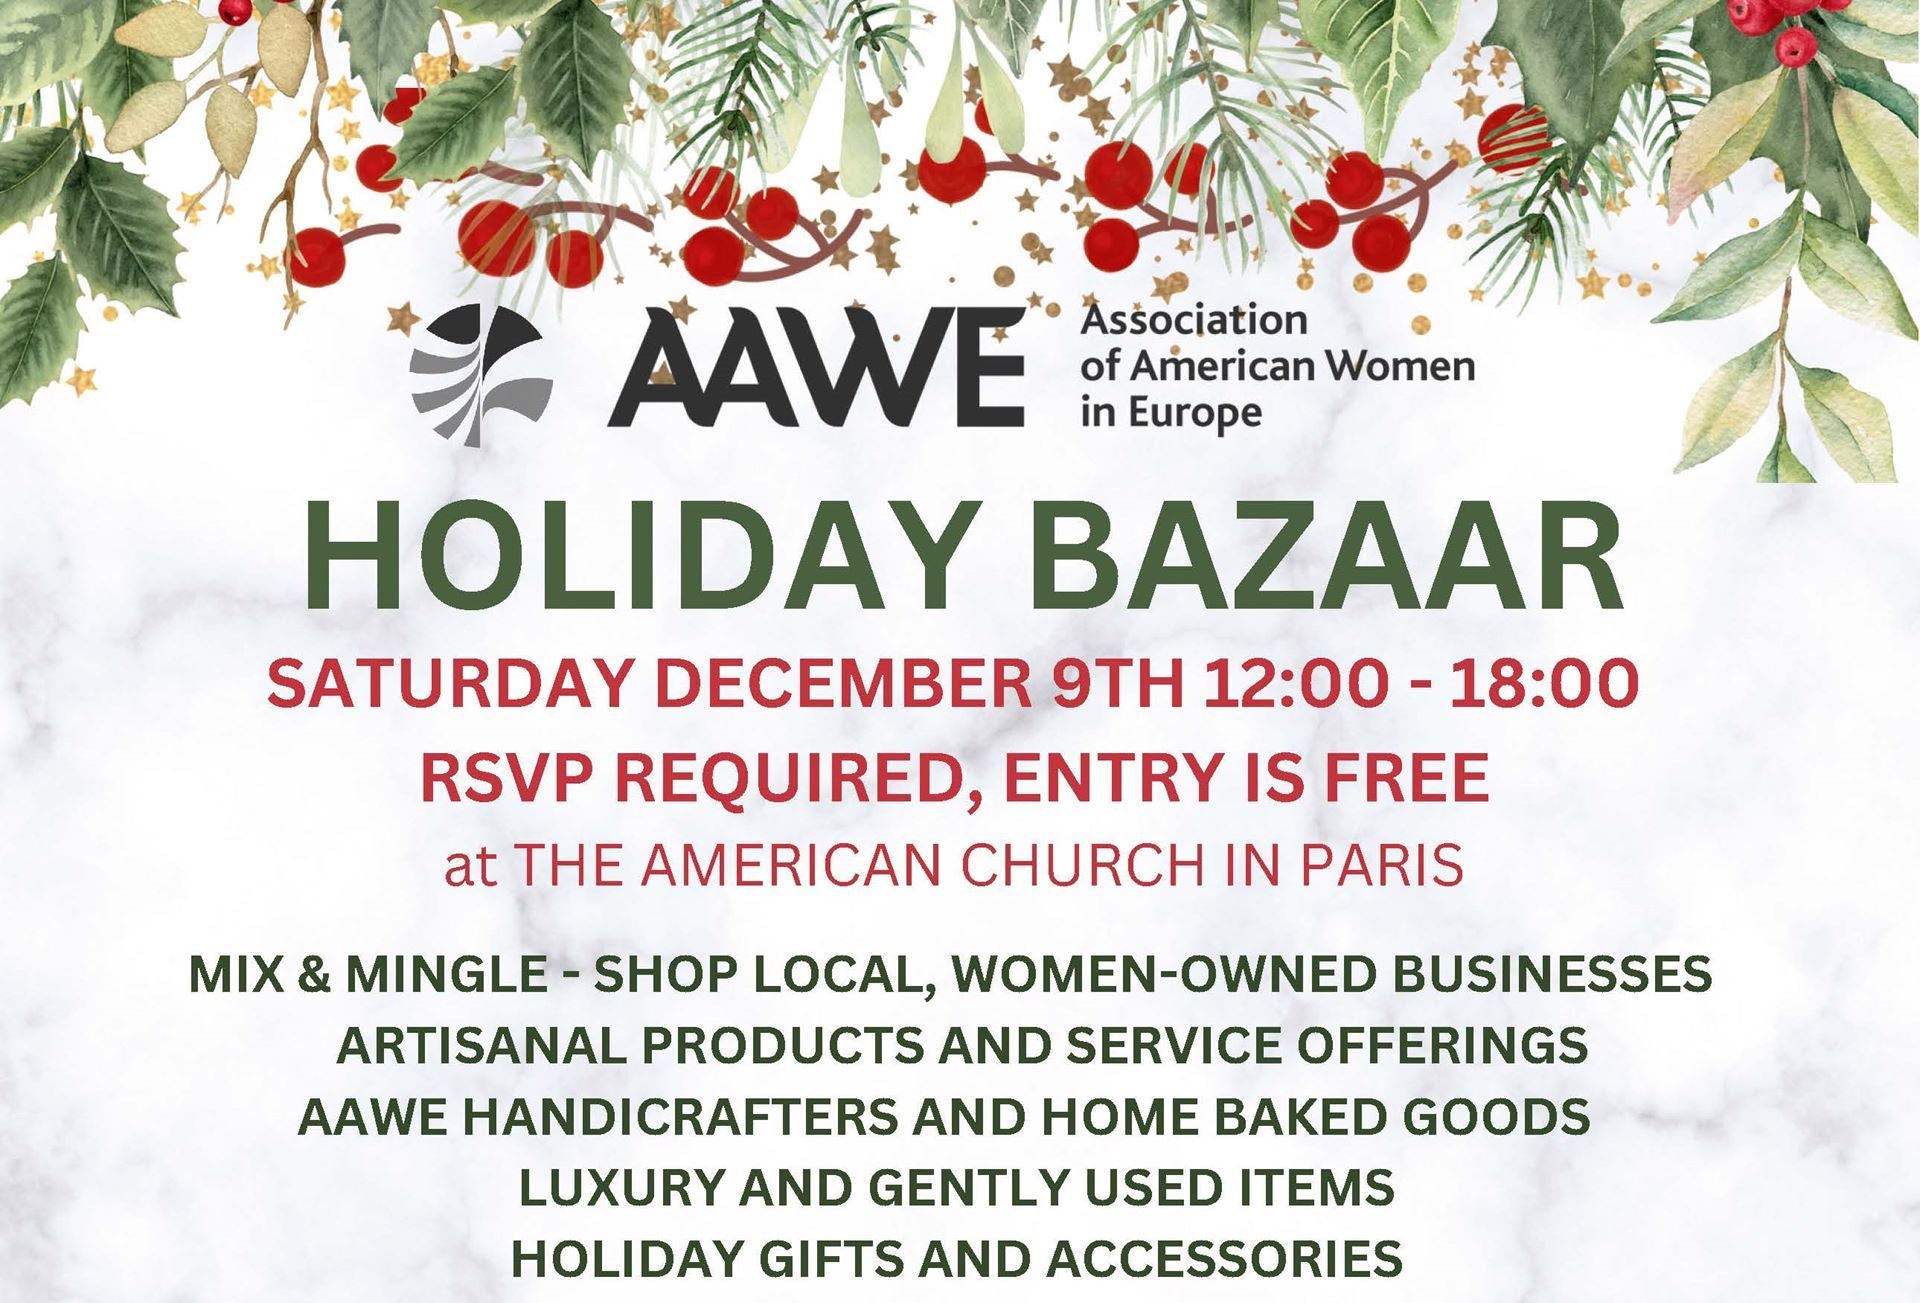 less is more at the AAWE Holiday Bazaar